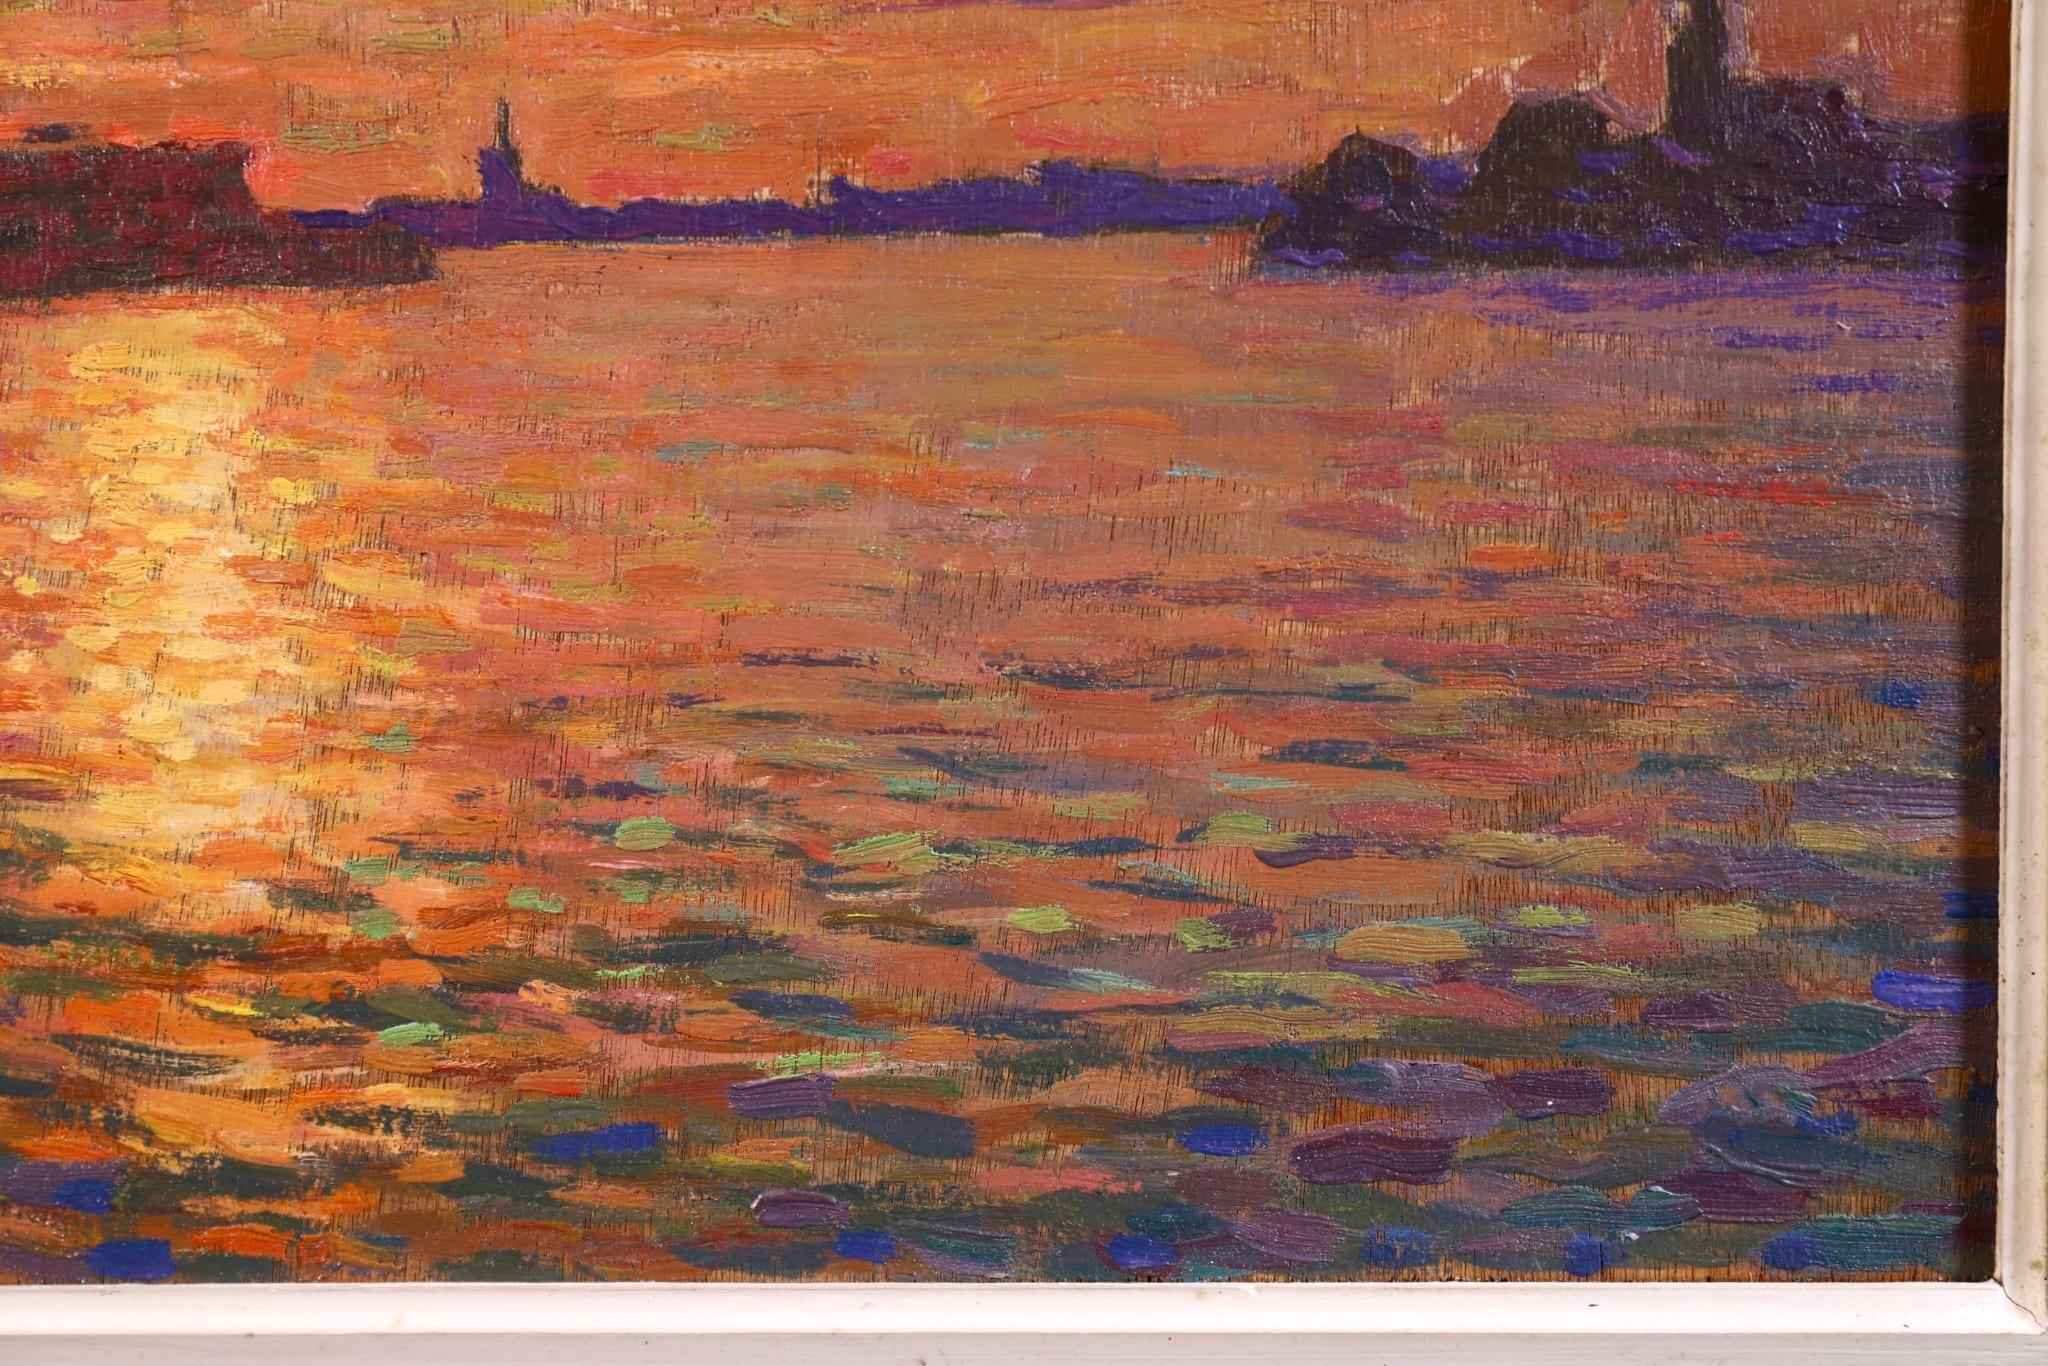 Sunset - Amsterdam - Post Impressionist Oil, Seascape - Jacques Martin-Ferrieres 2